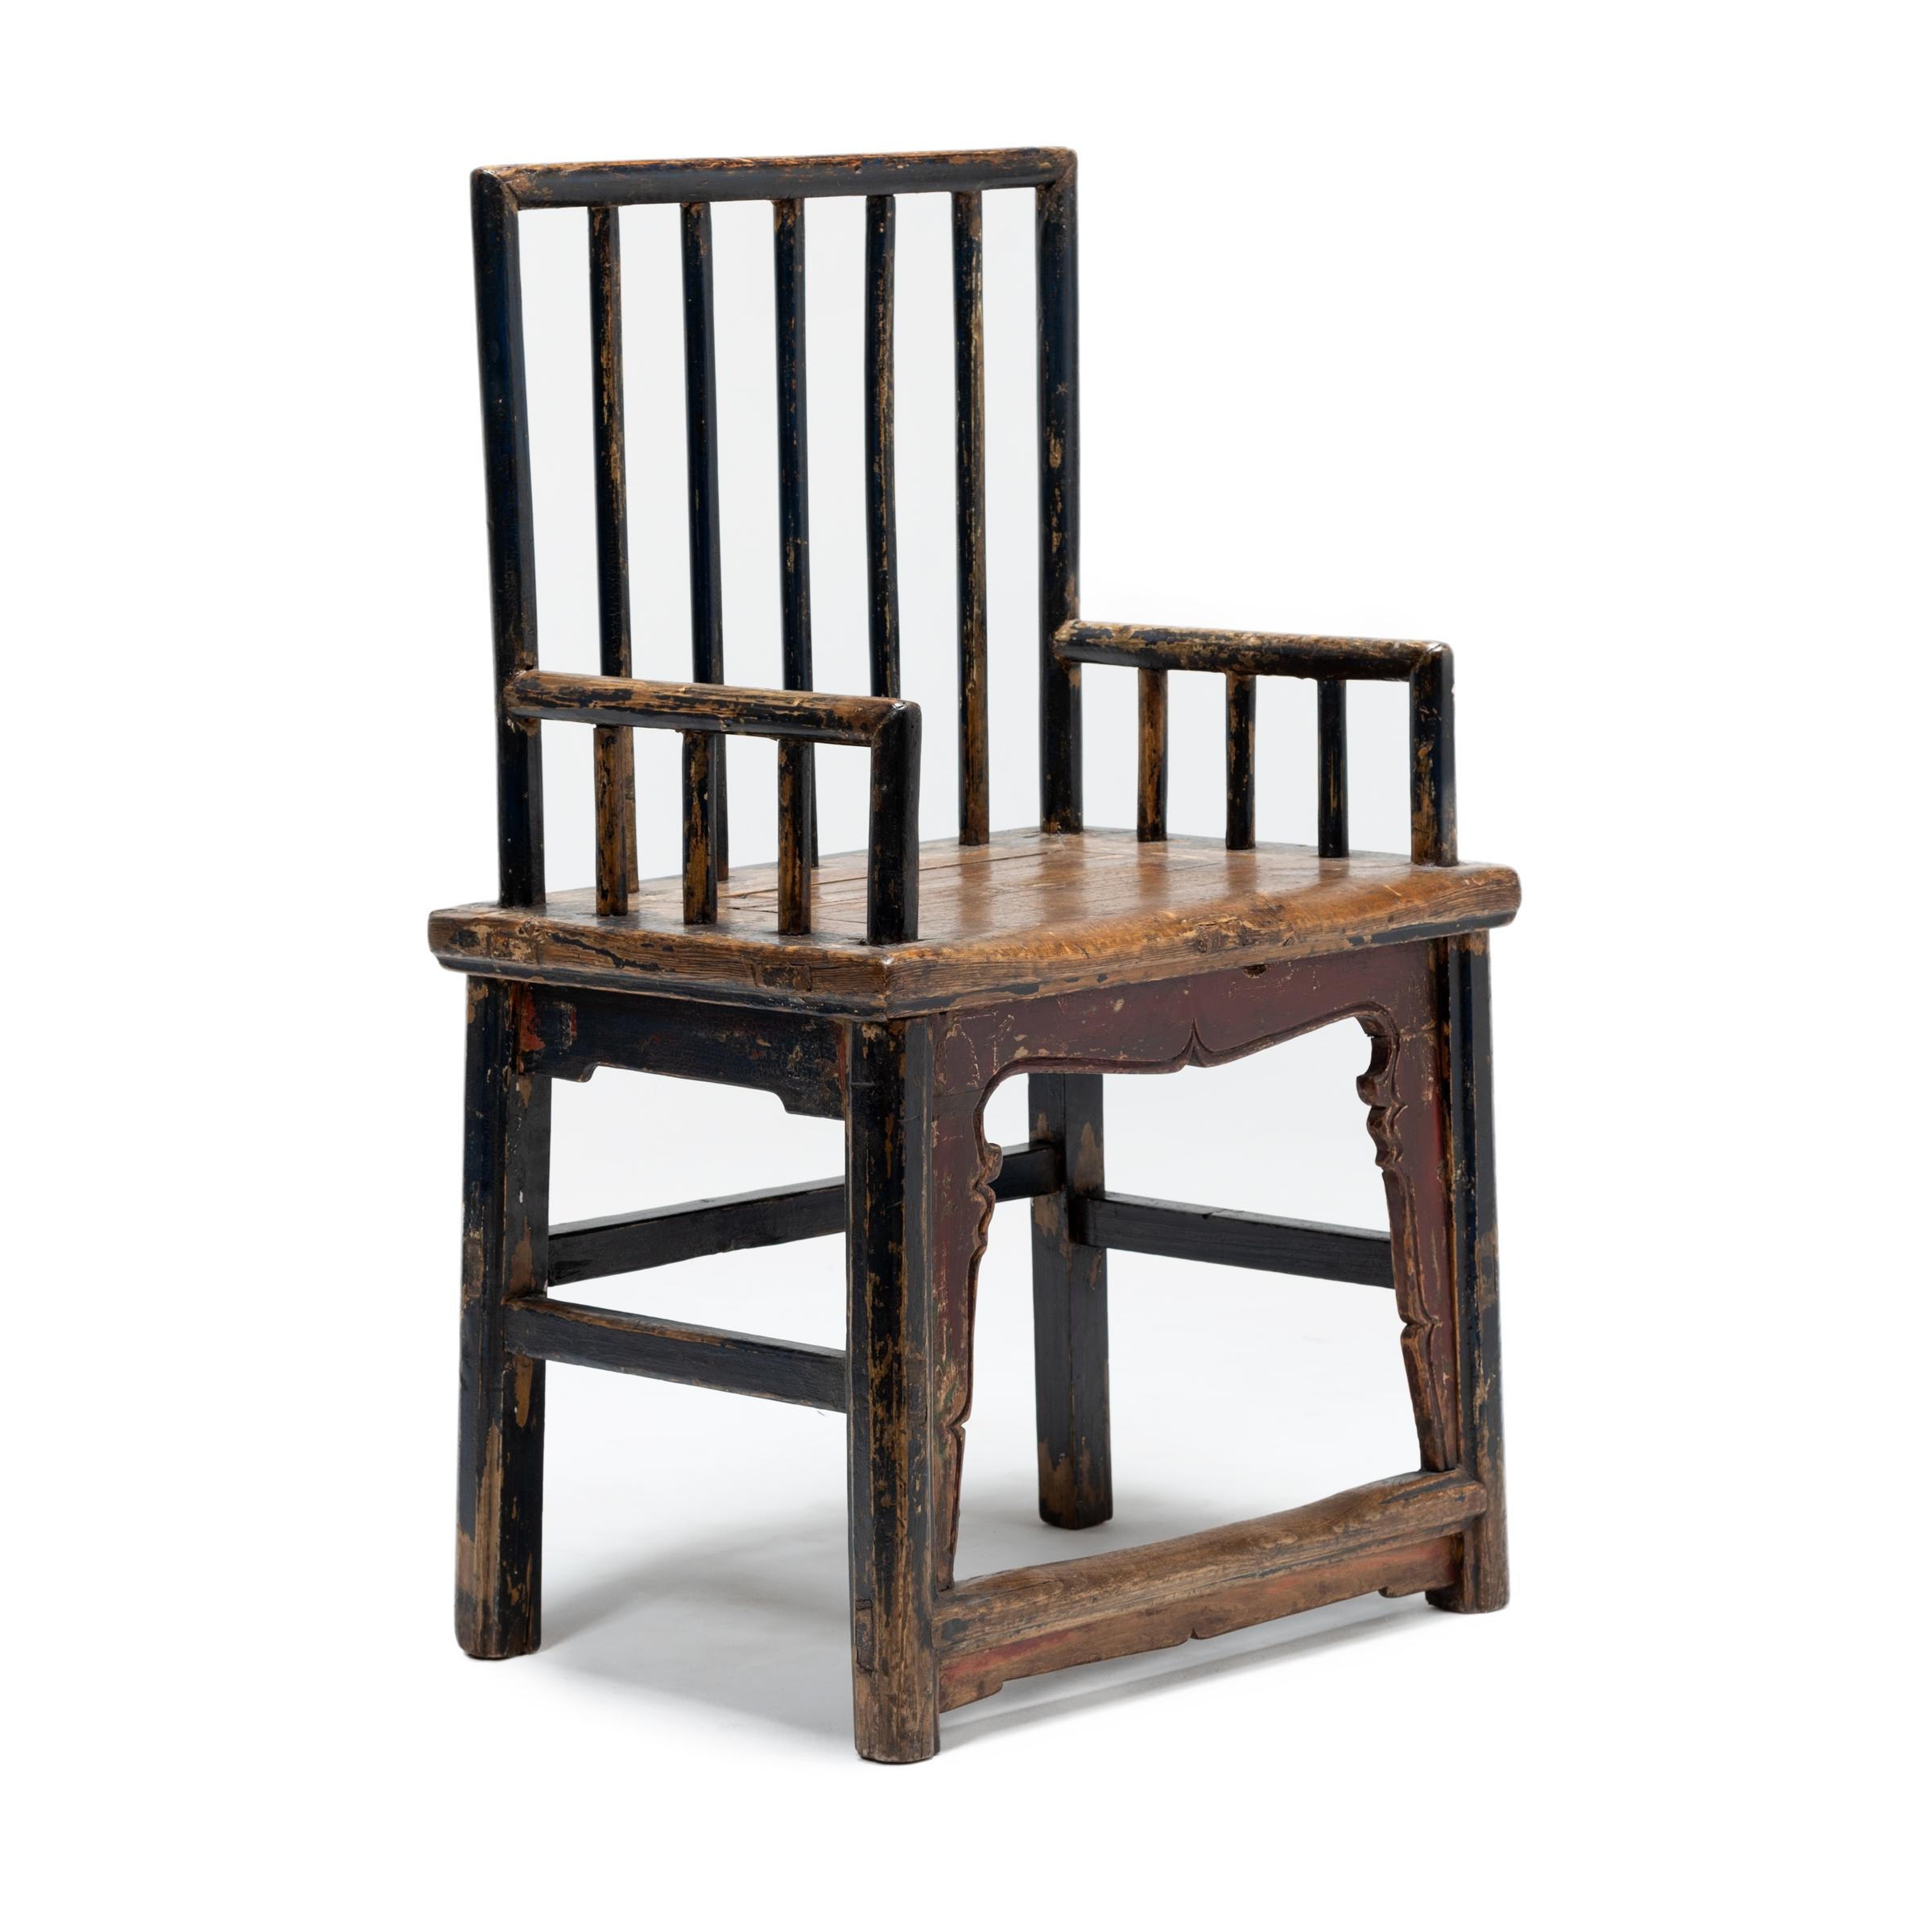 This pair of curious 19th century spindleback chairs defy traditional Qing-dynasty forms. A collection of moments from previous eras, the pair incorporates elements drawn from Chinese carpentry ideals spanning back as far as the 16th century. The